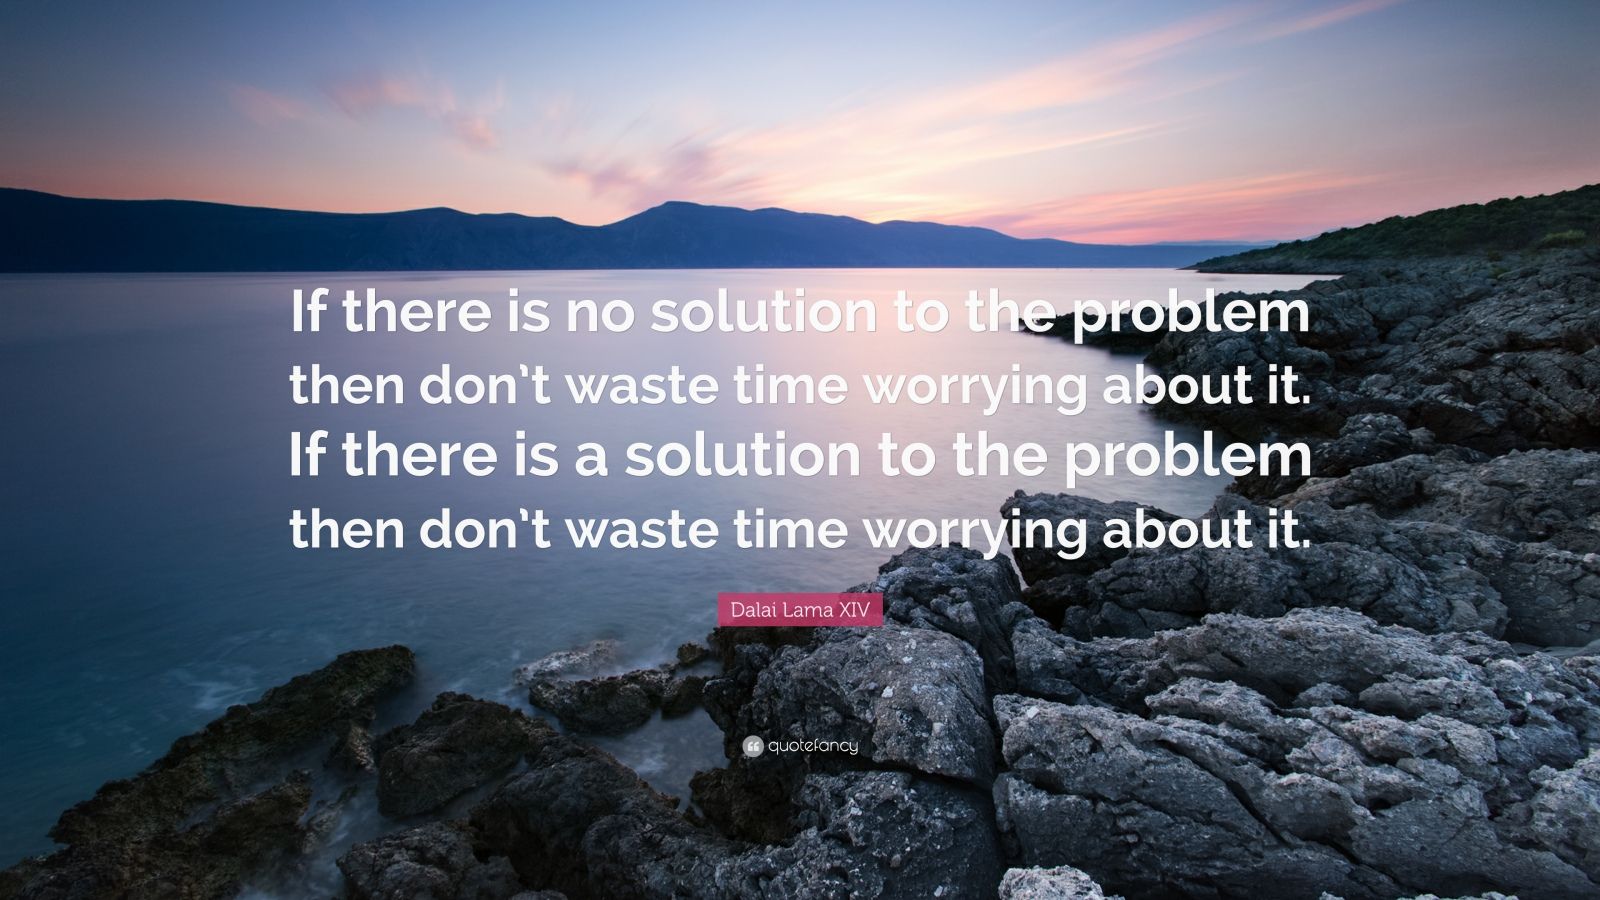 Dalai Lama XIV Quote: “If there is no solution to the problem then don't  waste time worrying about it. If there is a solution to the problem th...”